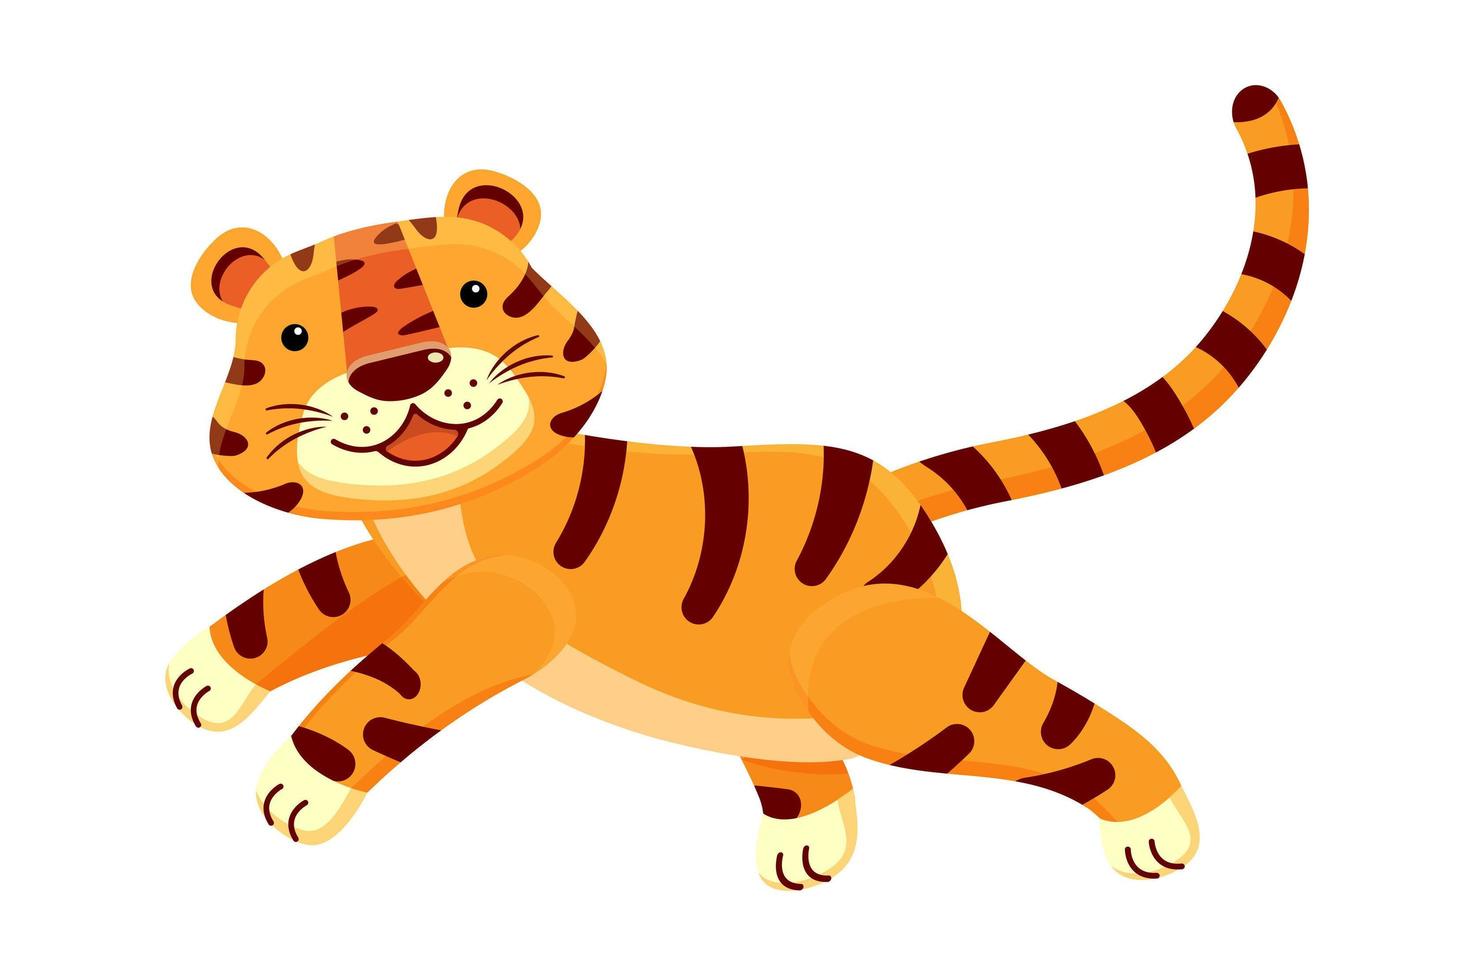 Tiger Cub Jumping Rejoices Cartoon Style Isolated White Background. vector